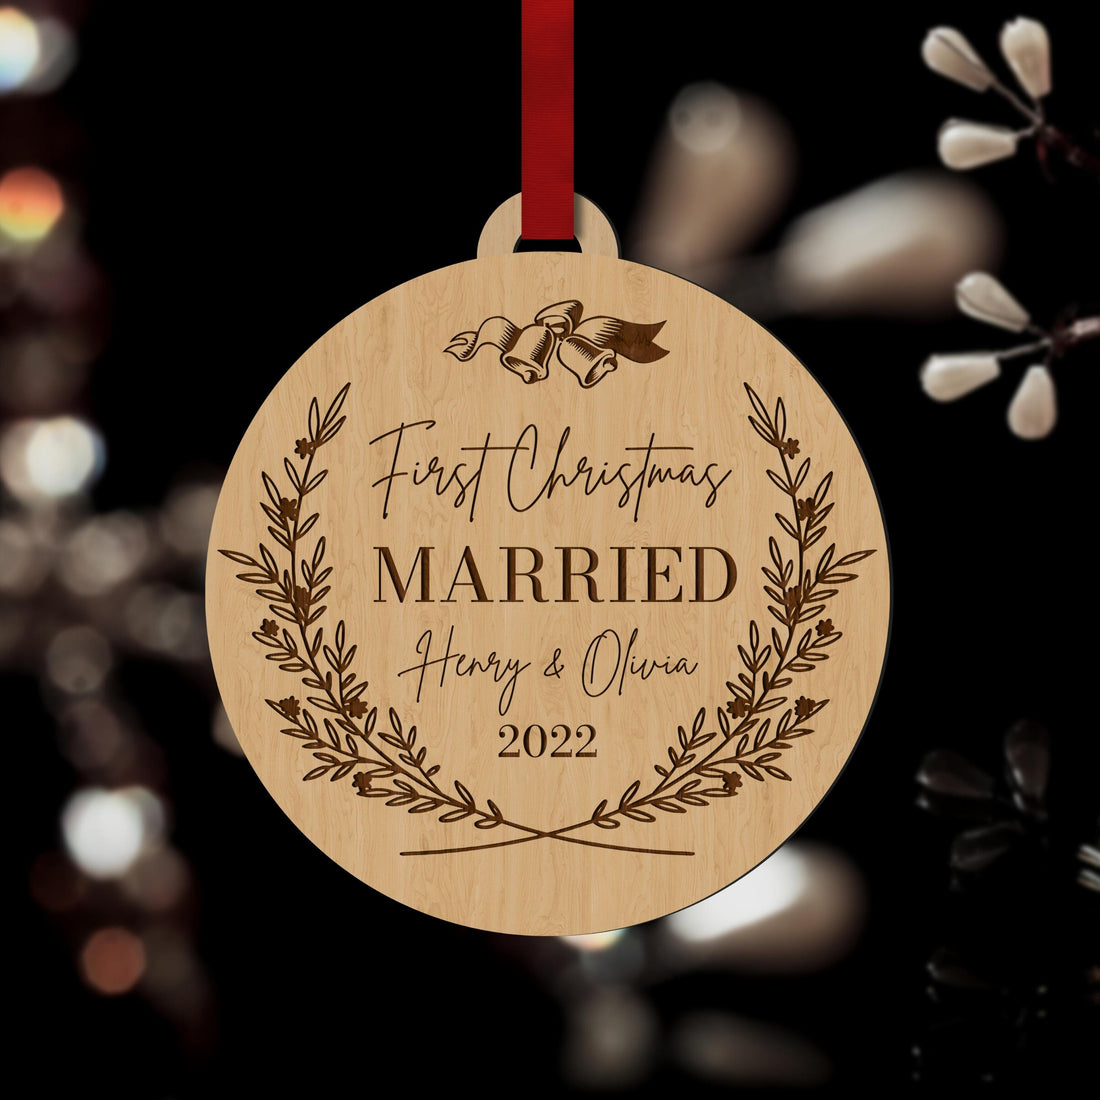 Personalised First Christmas Engaged/ Married Wreath Baubles, Engraved Custom Name Birch Wooden Hanging Tree Merry Xmas, Happy New Year Ornament, Decor Housewarming Gift Tags